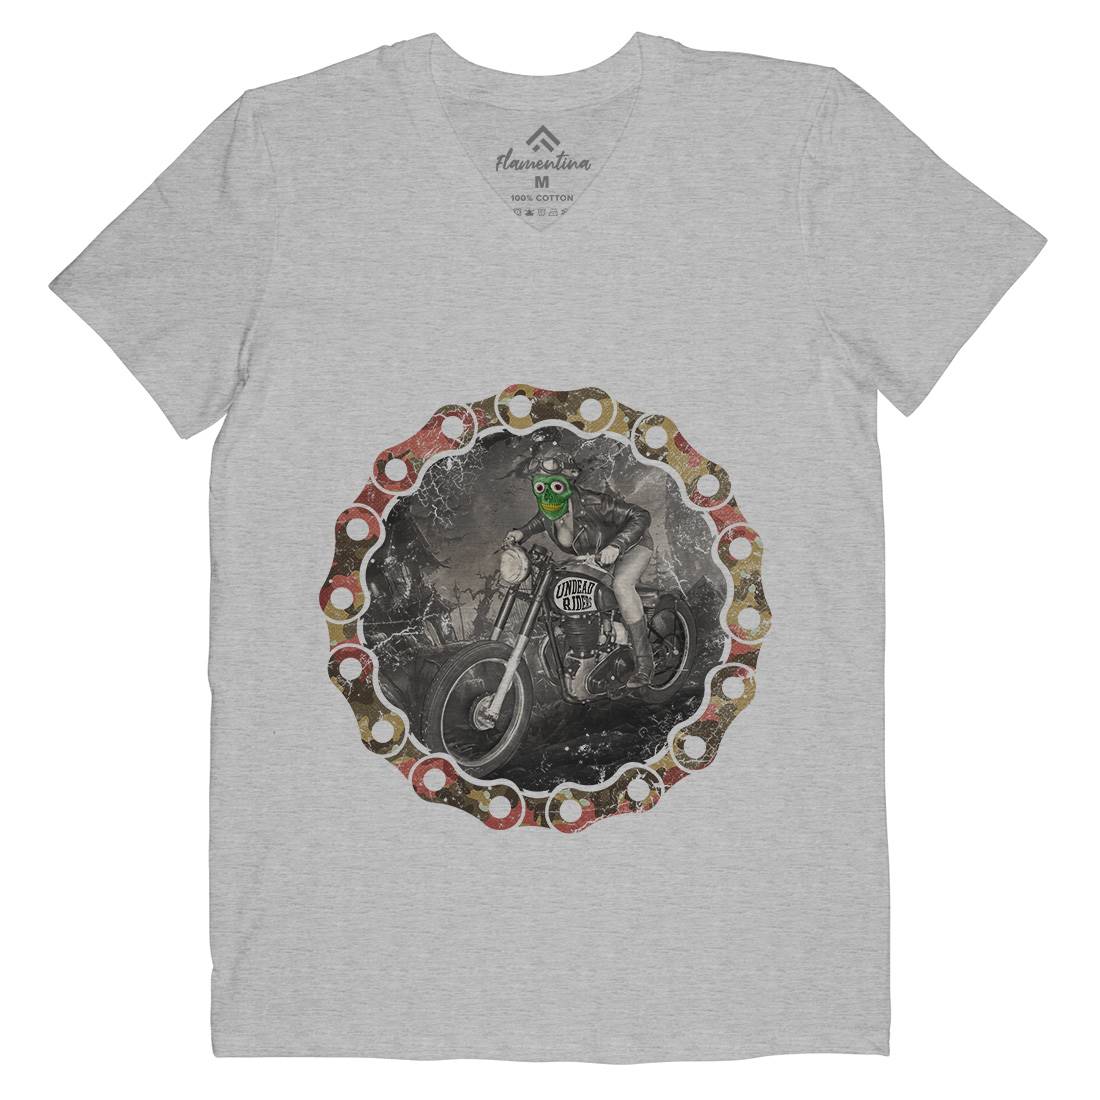 Undead Riders Mens Organic V-Neck T-Shirt Motorcycles A937